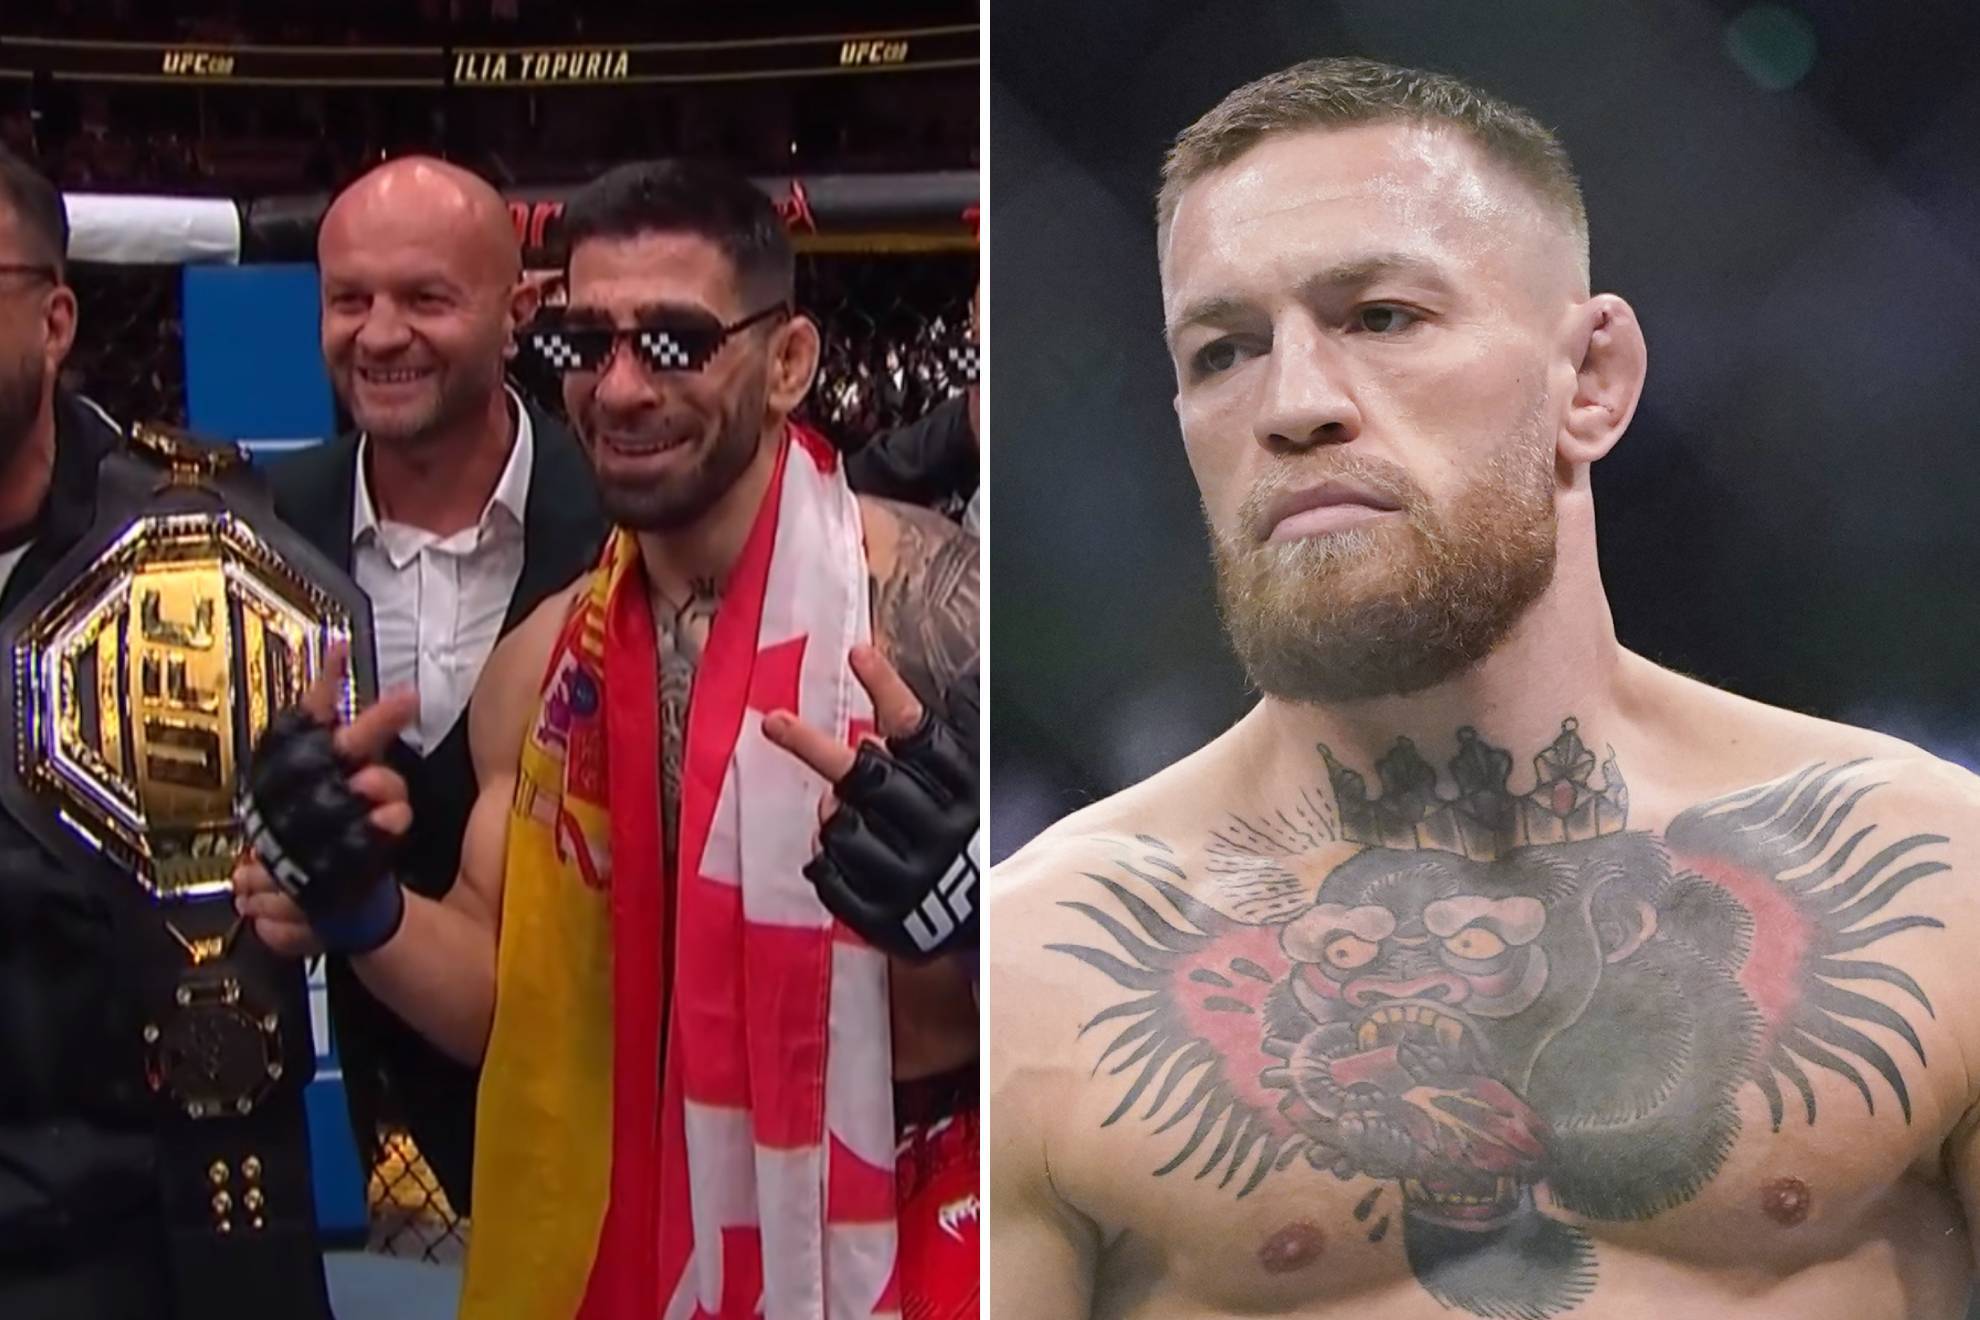 Topuria challenges McGregor after beating Volkanovski: If you have balls, Ill wait for you in Spain